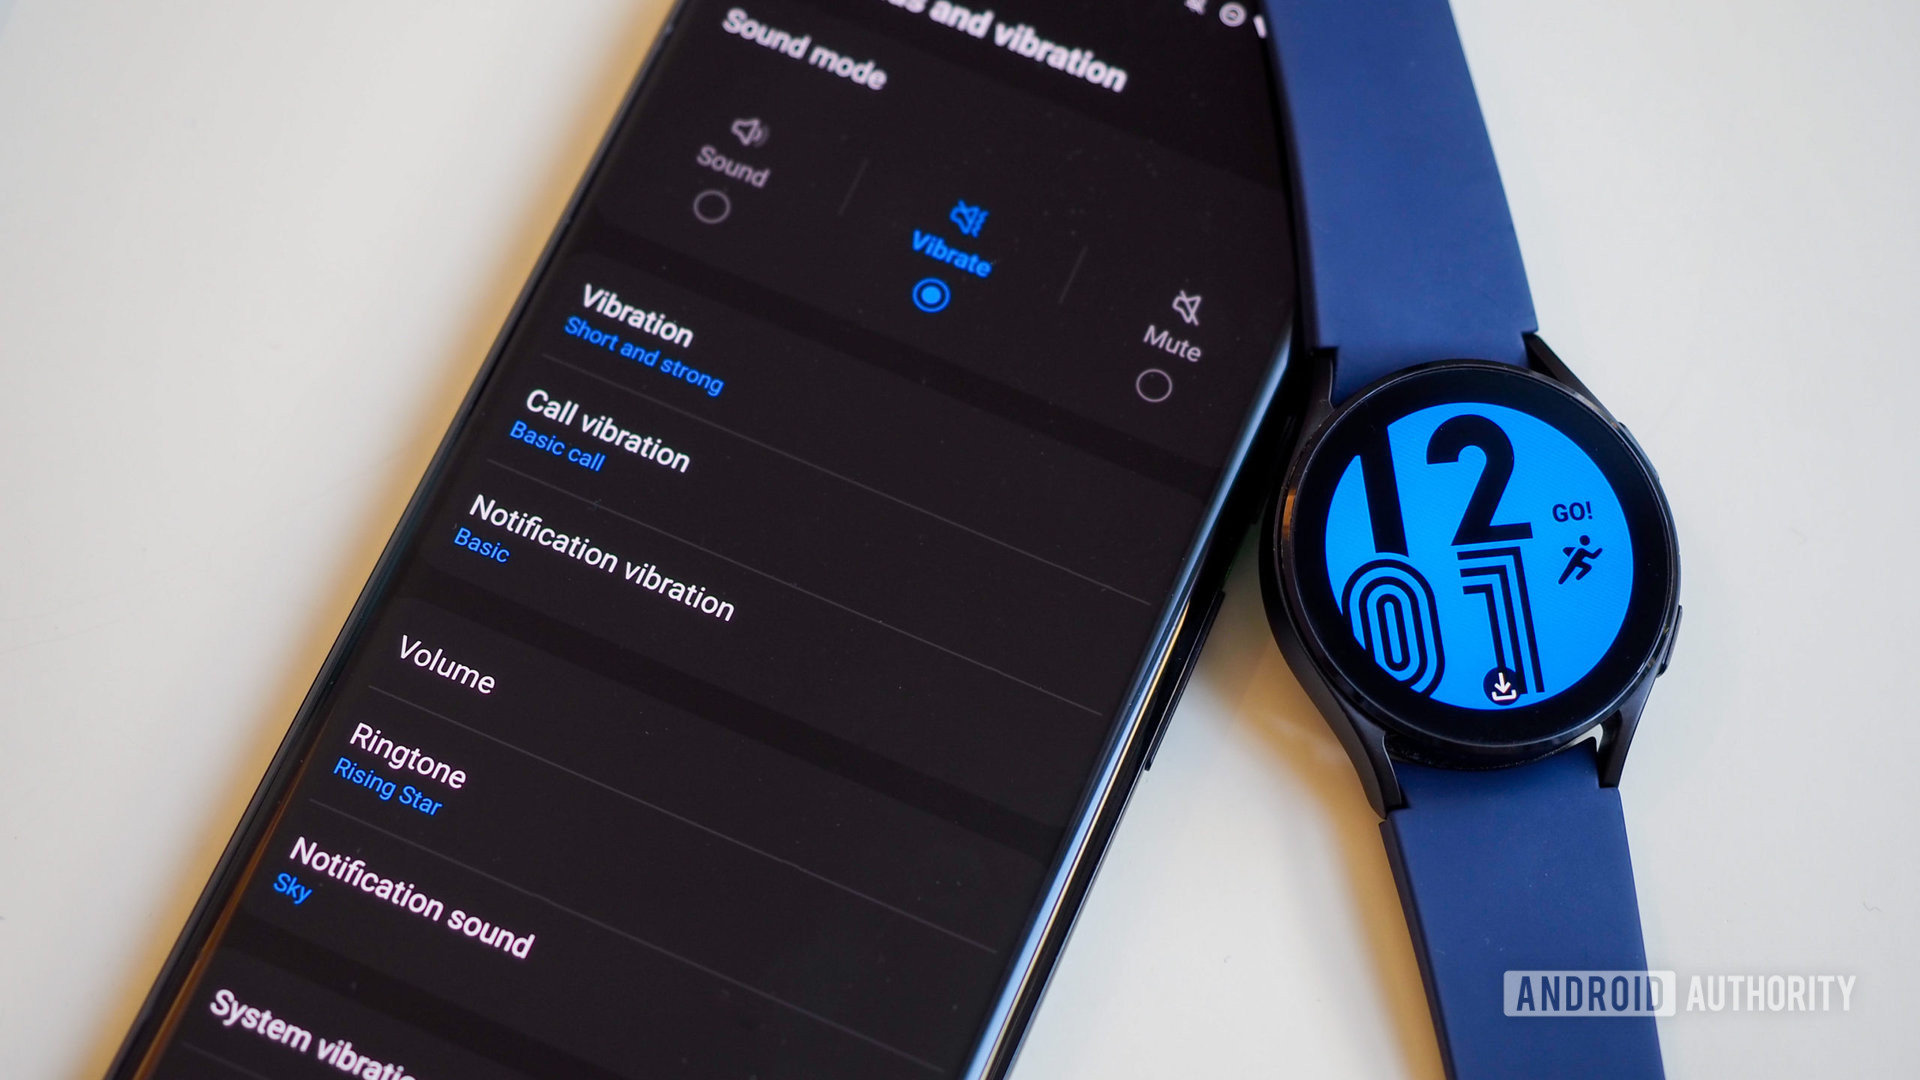 Galaxy Watch 4 and Galaxy Wearable app on a Pixel 6 Pro showing sound and notification management